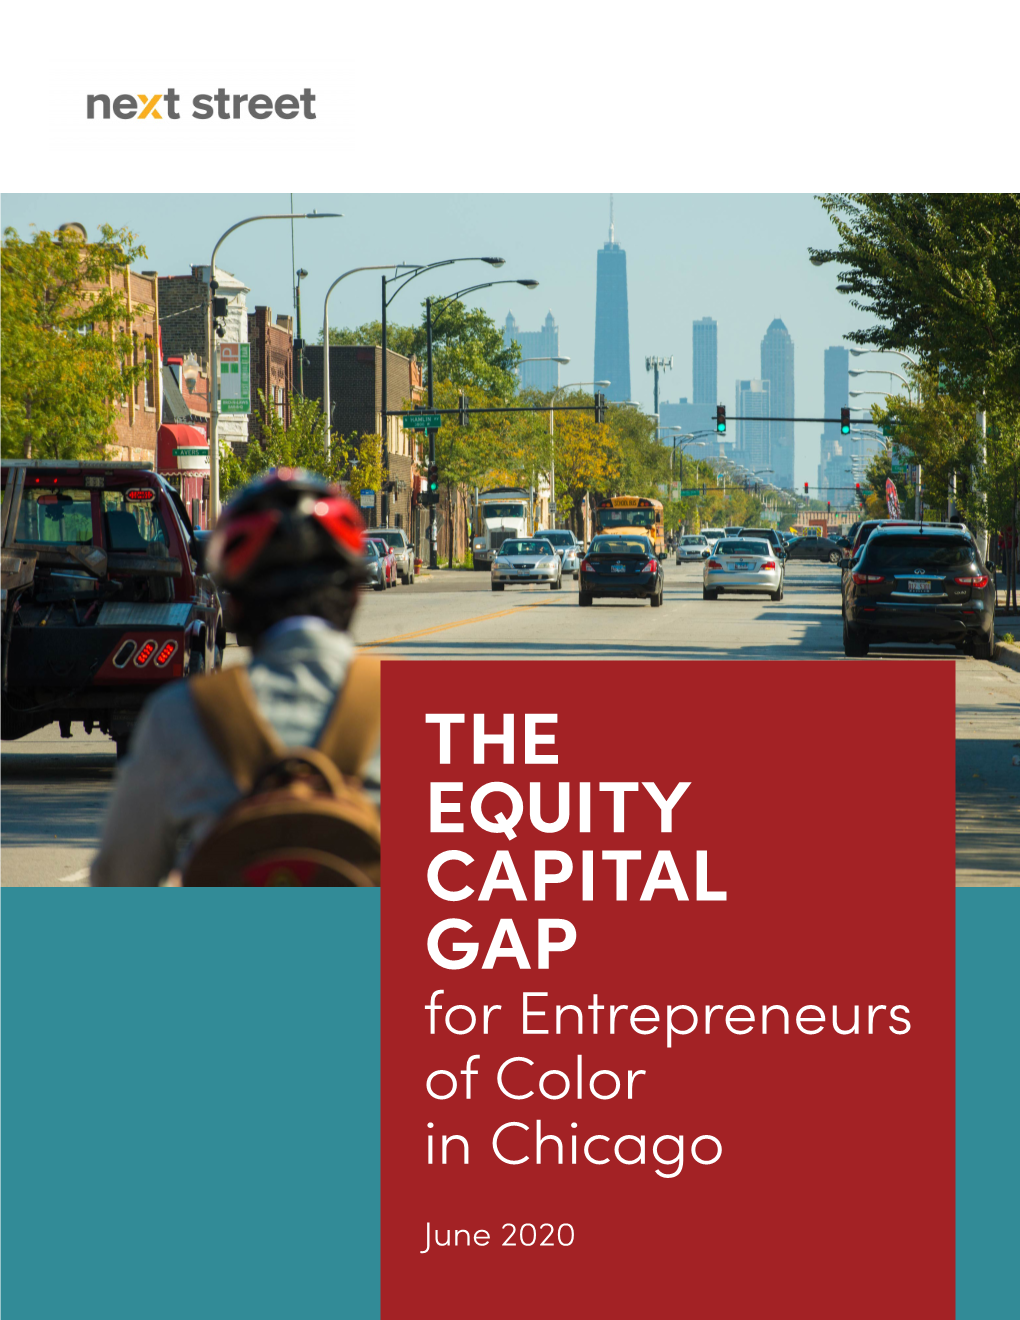 THE EQUITY CAPITAL GAP for Entrepreneurs of Color in Chicago